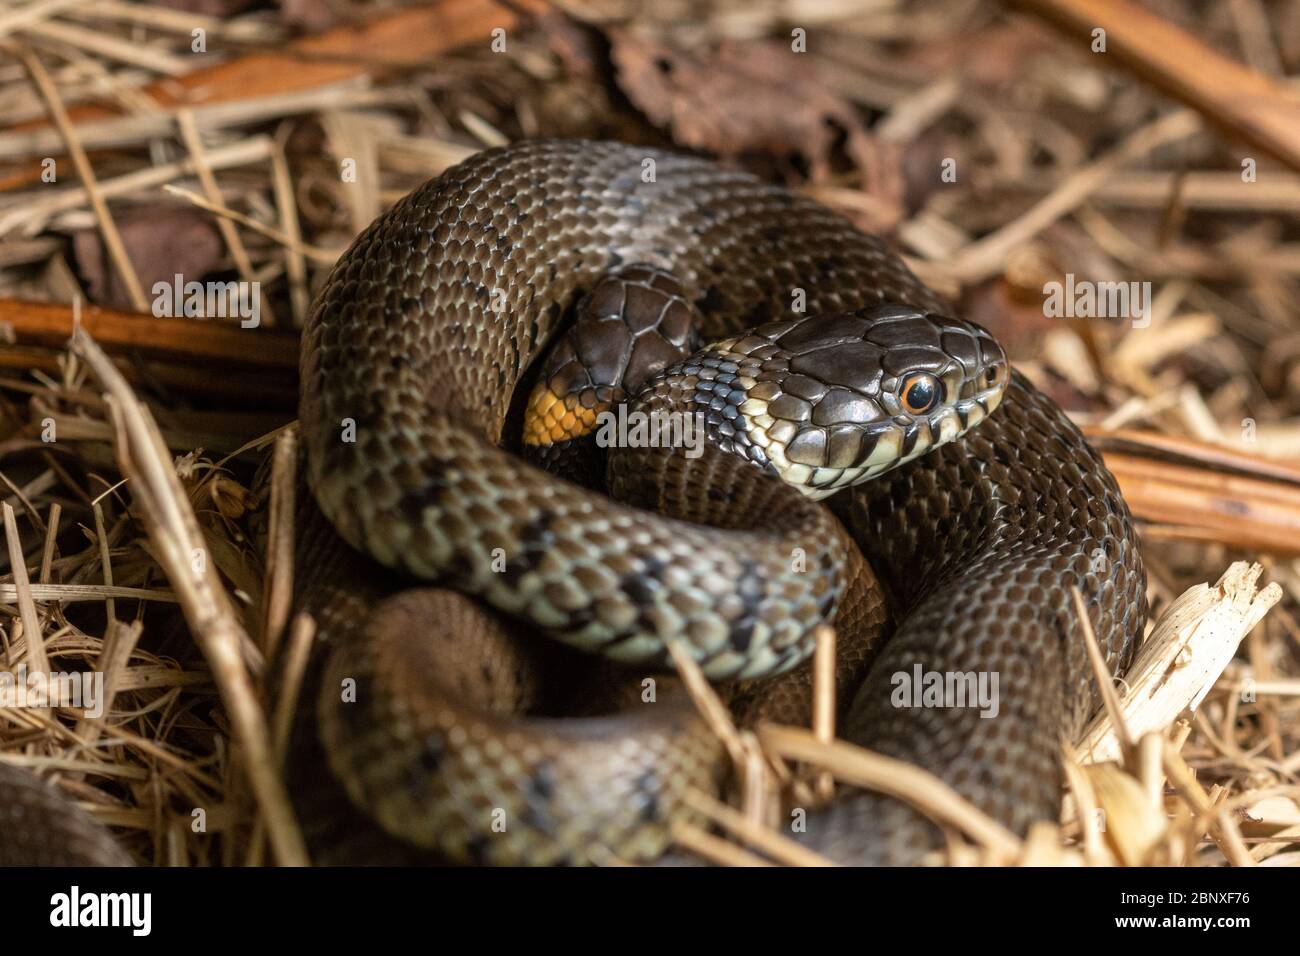 Two young grass snakes (Natrix natrix Helvetica) coiled up together in Surrey, UK Stock Photo